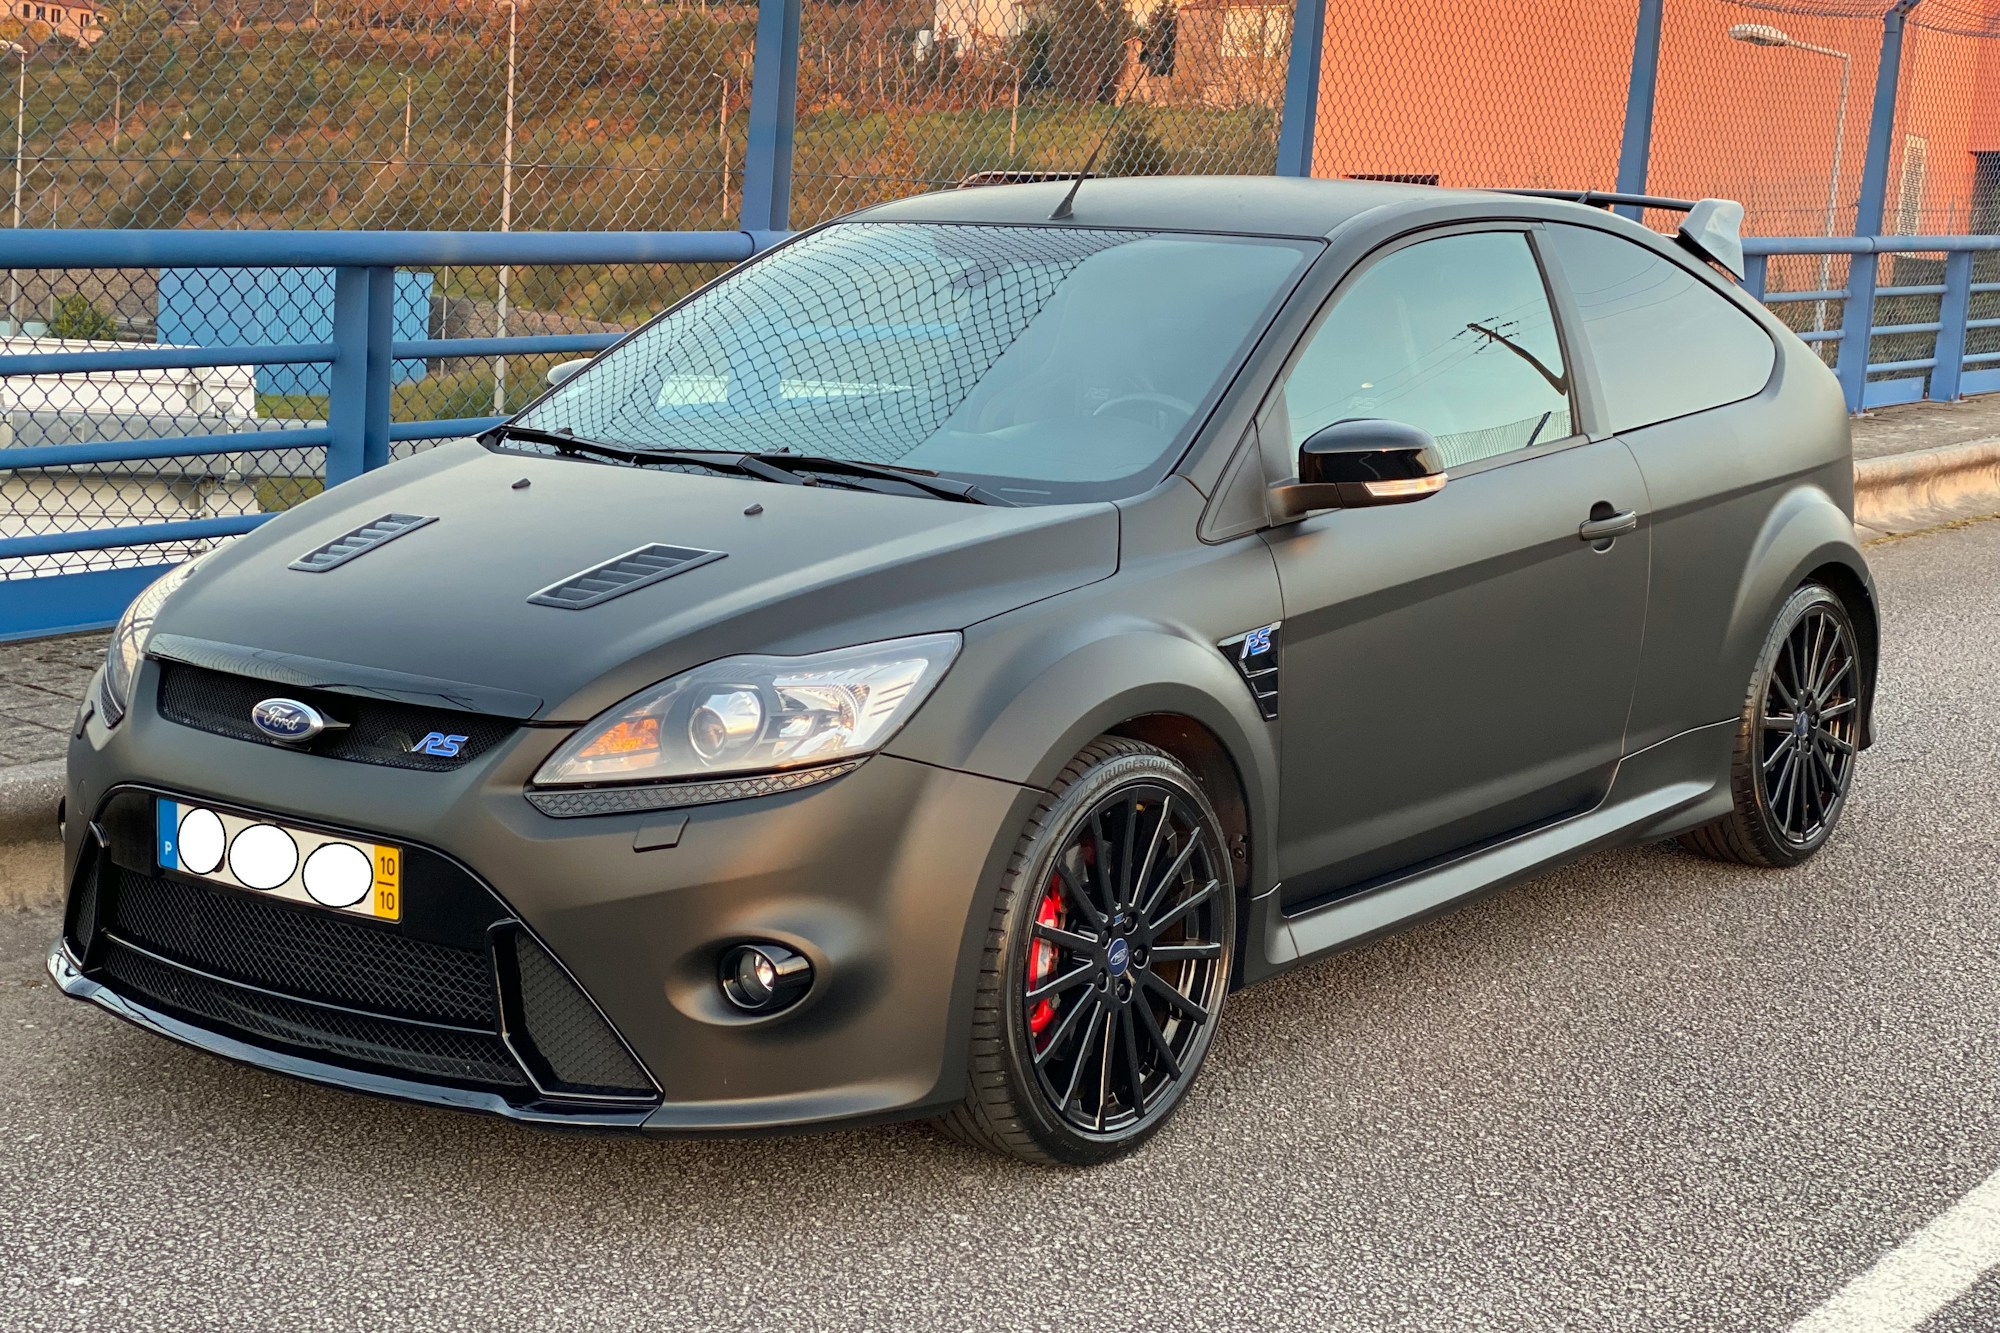 2010 Ford Focus (Mk2) RS500 – 9,720 KM for sale by auction in Oslo, Norway